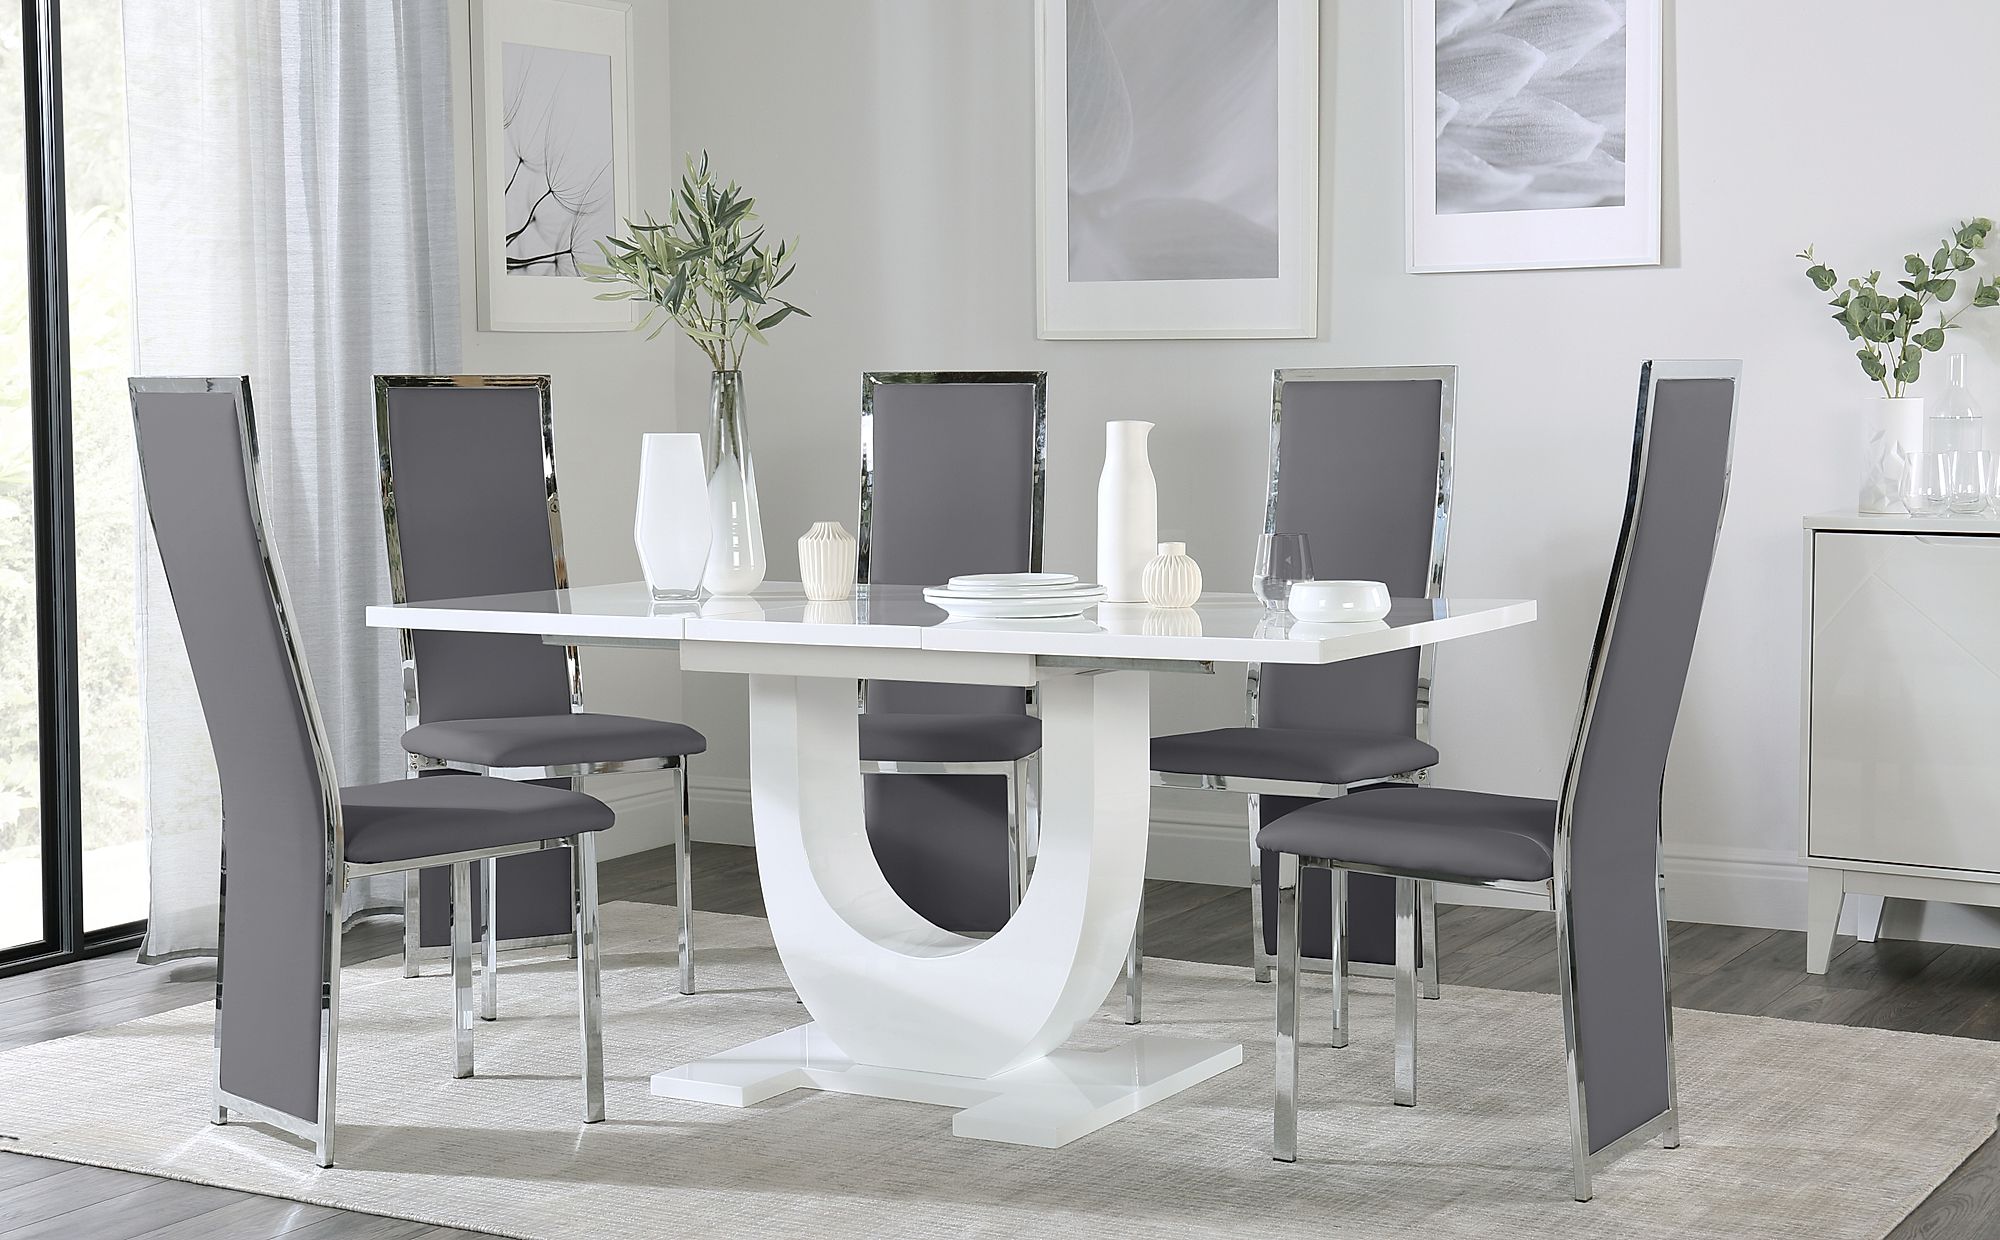 Oslo White High Gloss Extending Dining Table with 4 Celeste Grey